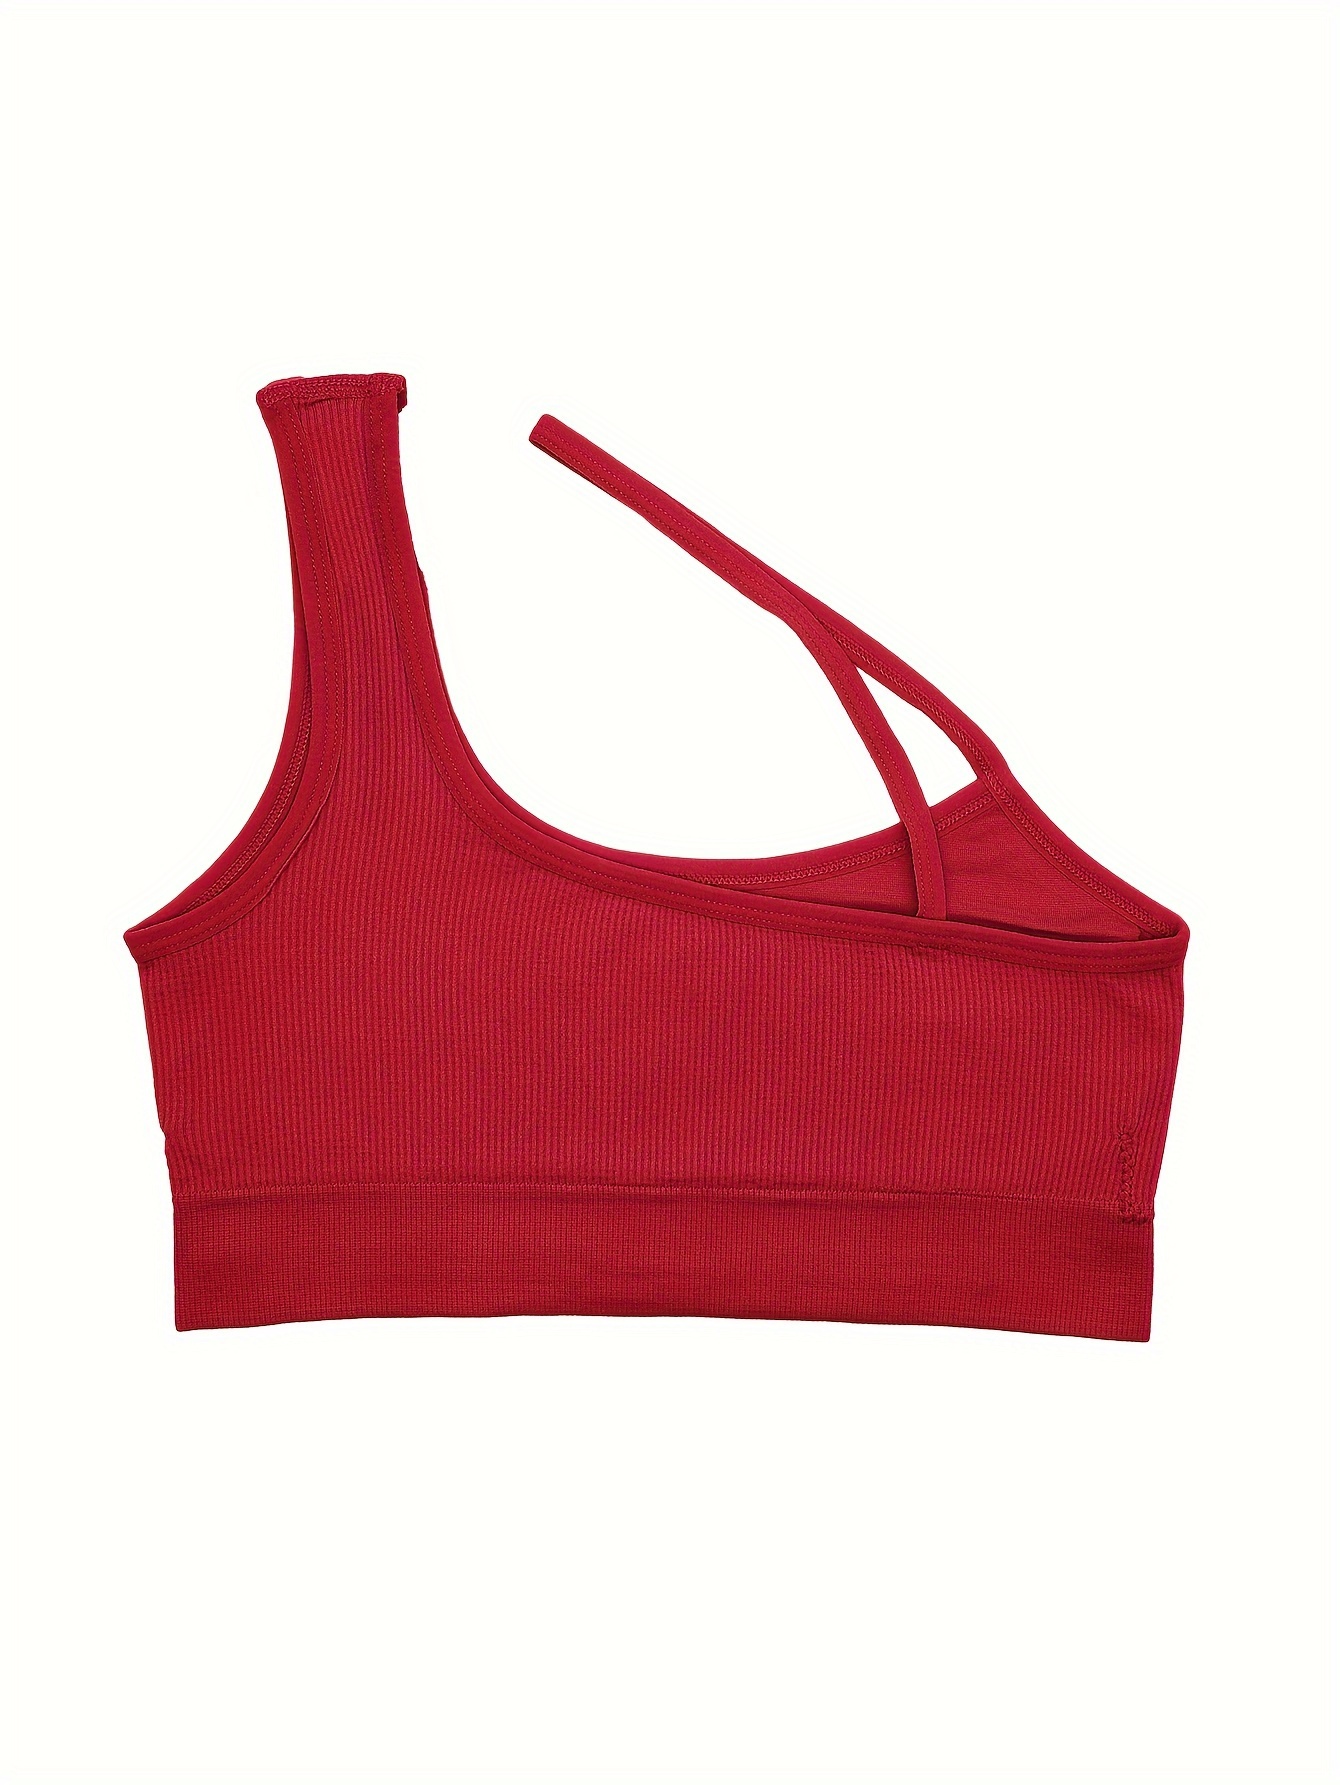 Red Sports Bra, Comfy Red Bra, Red Ribbed Sports Bra, Best Sports Bras, Comfy Red Ribbed Bra